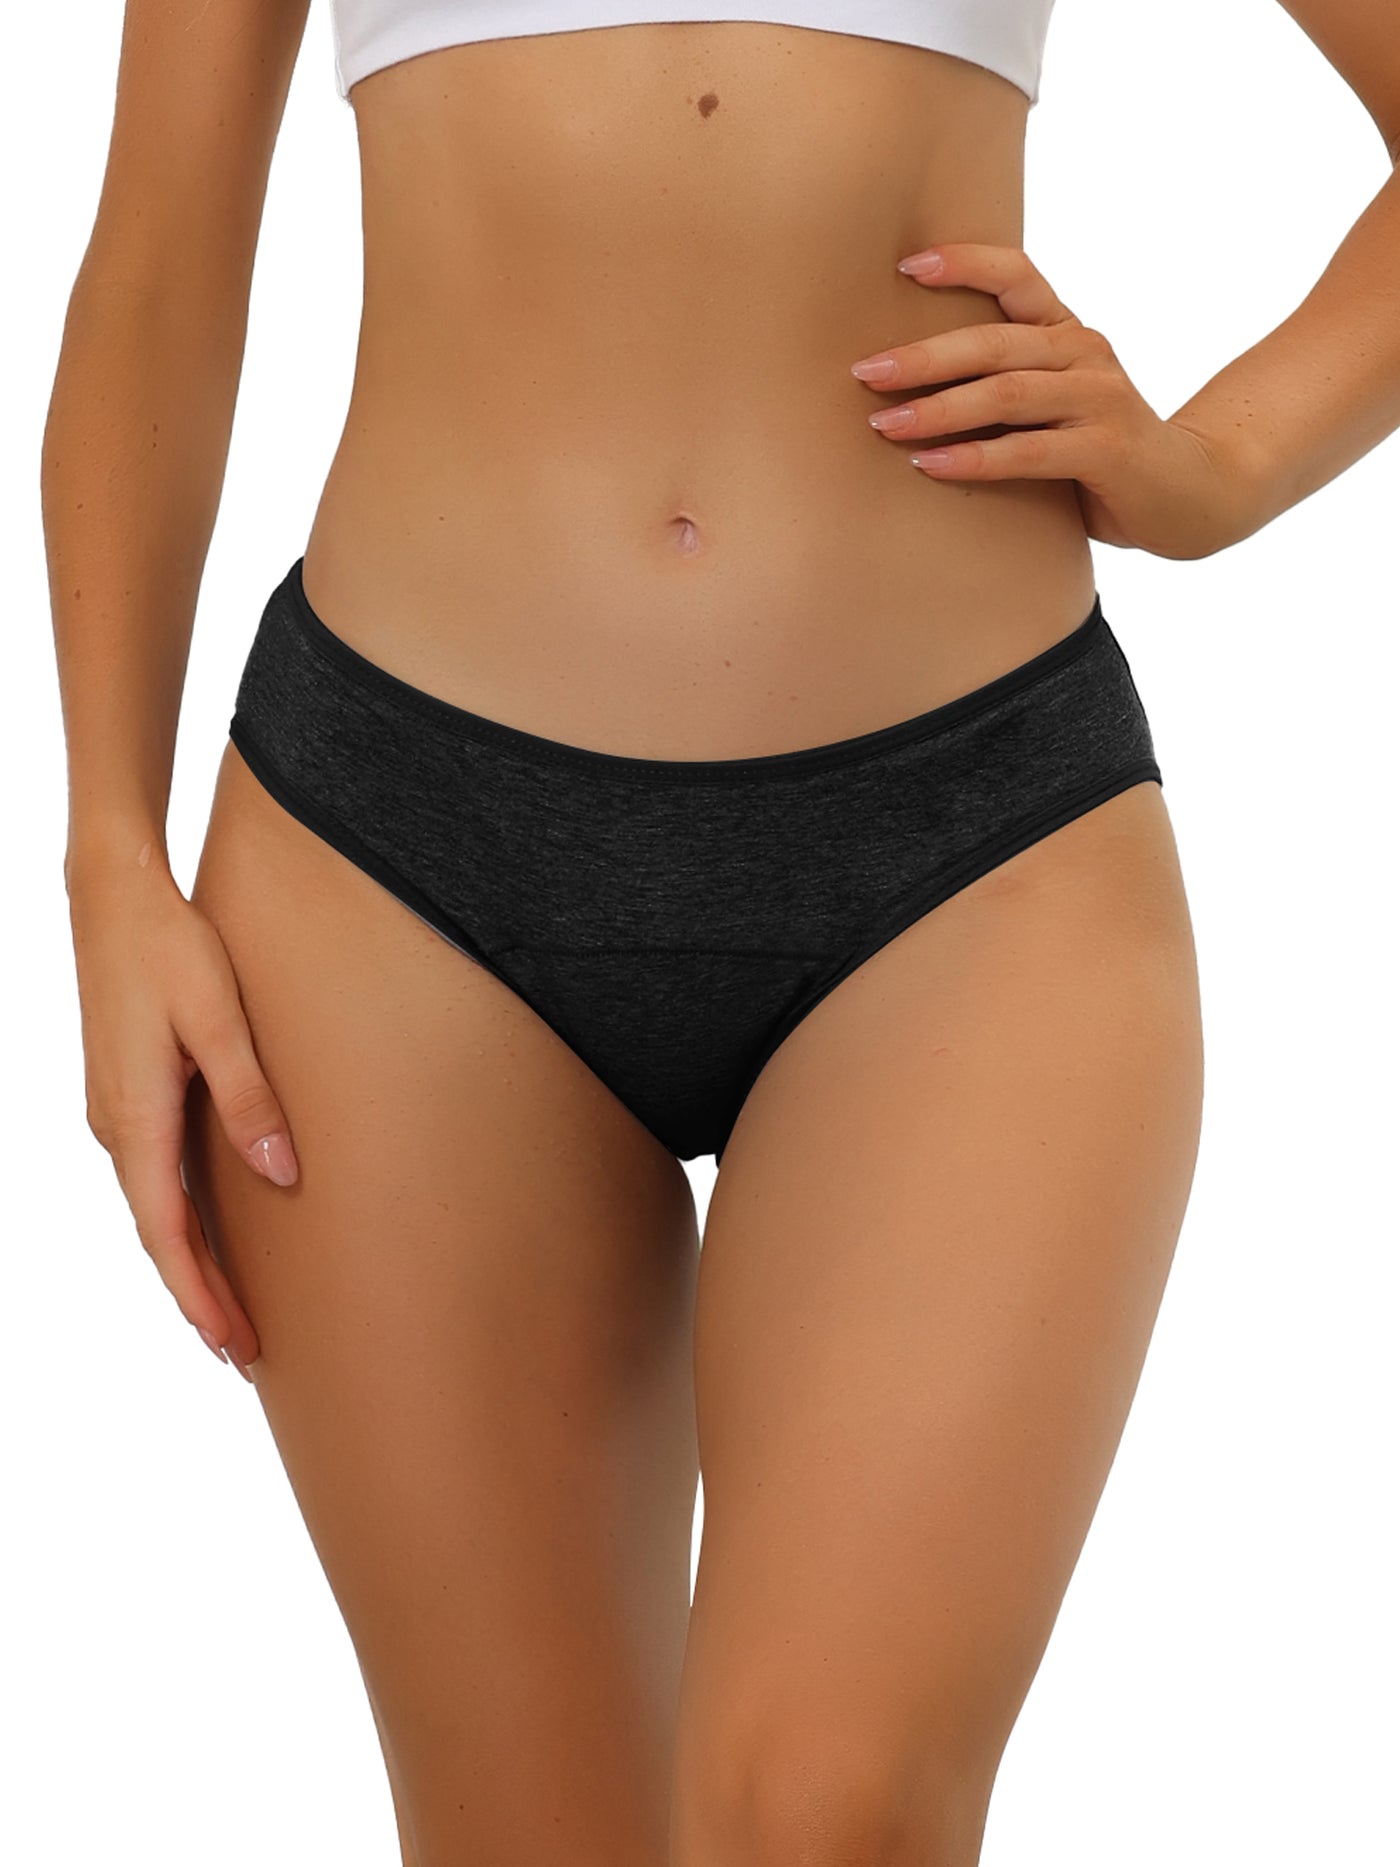 Allegra K Women's Period Underwear Mid-Rised Hipster Panties, Available in Plus Size